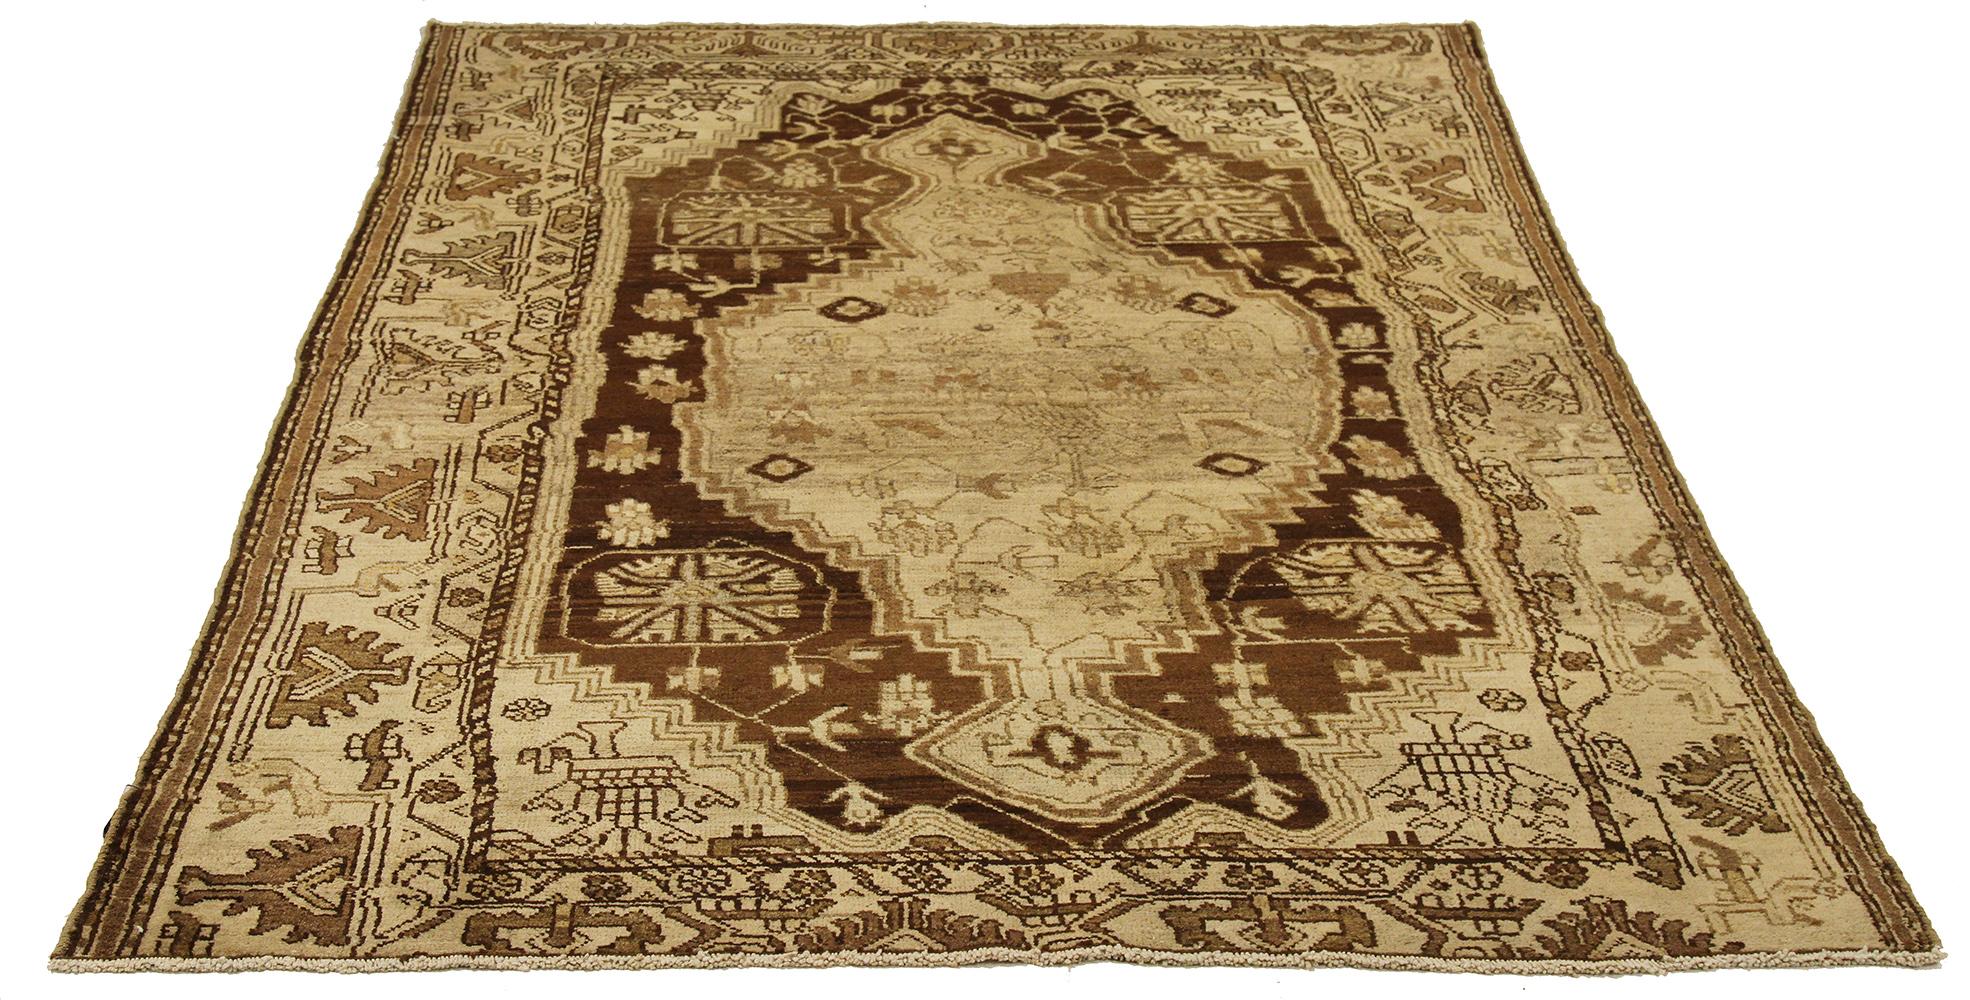 Antique Persian rug handwoven from the finest sheep’s wool and colored with all-natural vegetable dyes that are safe for humans and pets. It’s a traditional Shahsavan design highlighted by geometric tribal patterns on the centerfield. It’s a